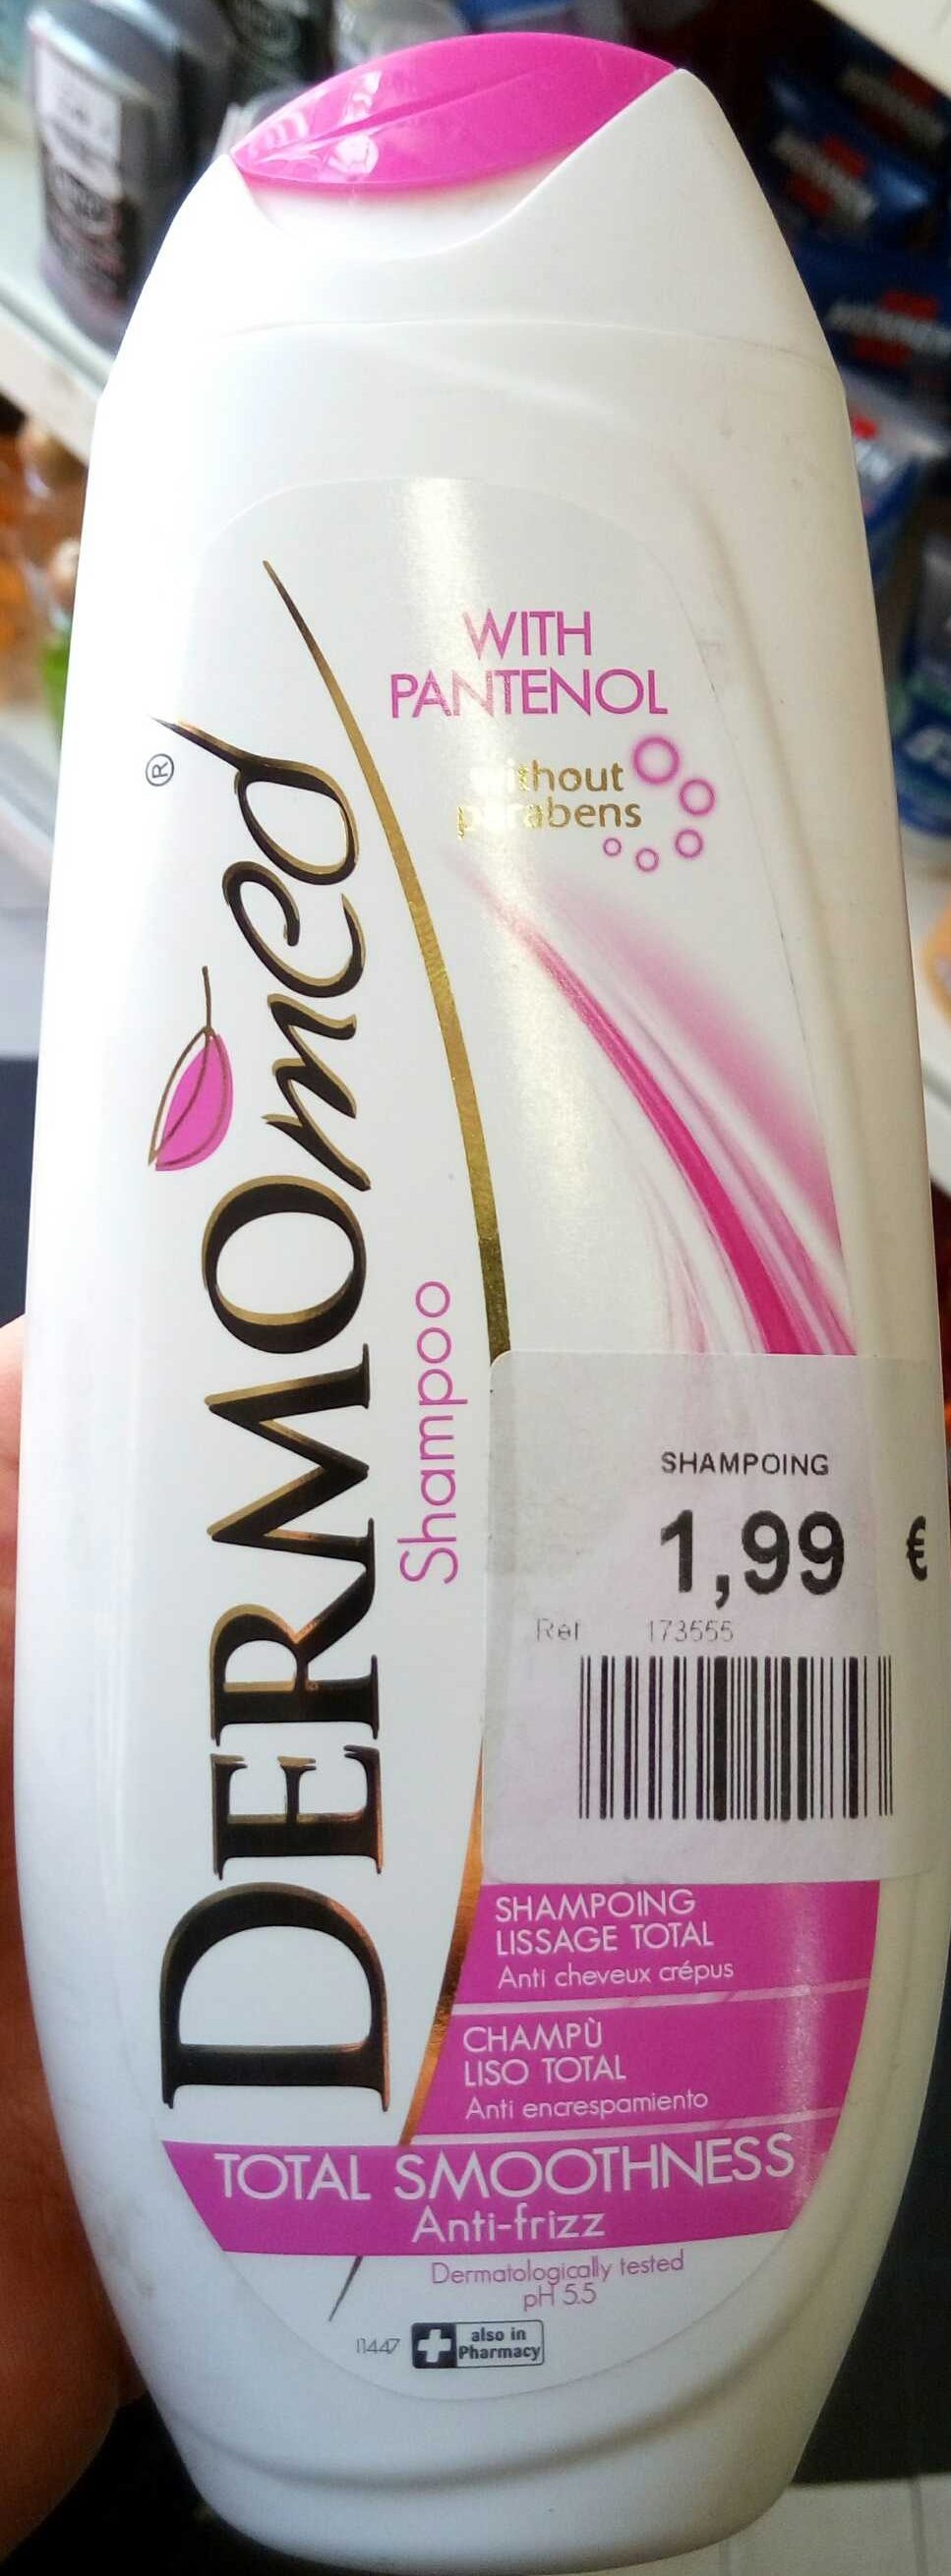 Shampoing Lissage Total - Produto - fr